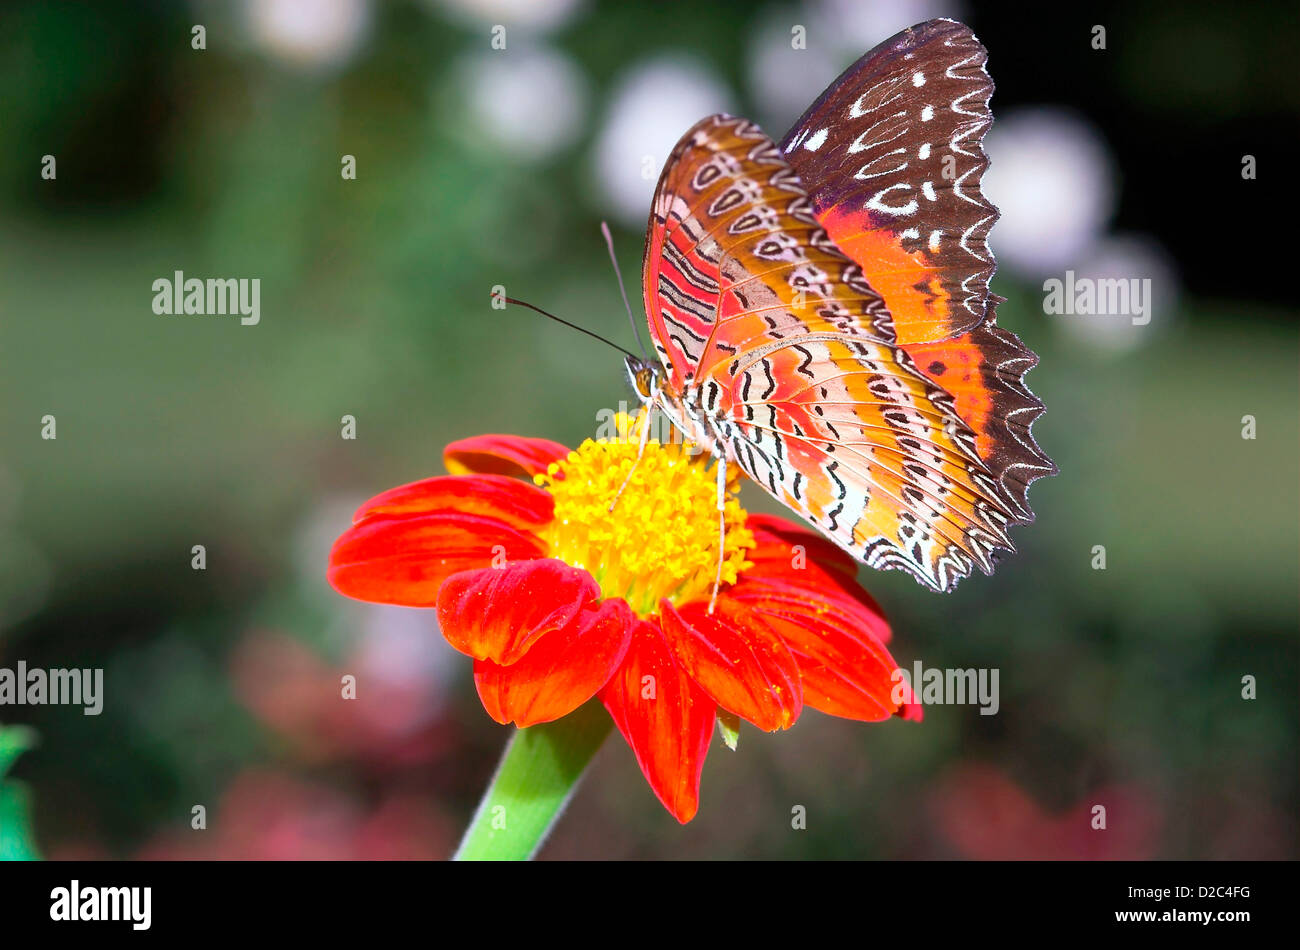 Butterfly, Red Lacewing, Arunachal Pradesh, India Stock Photo